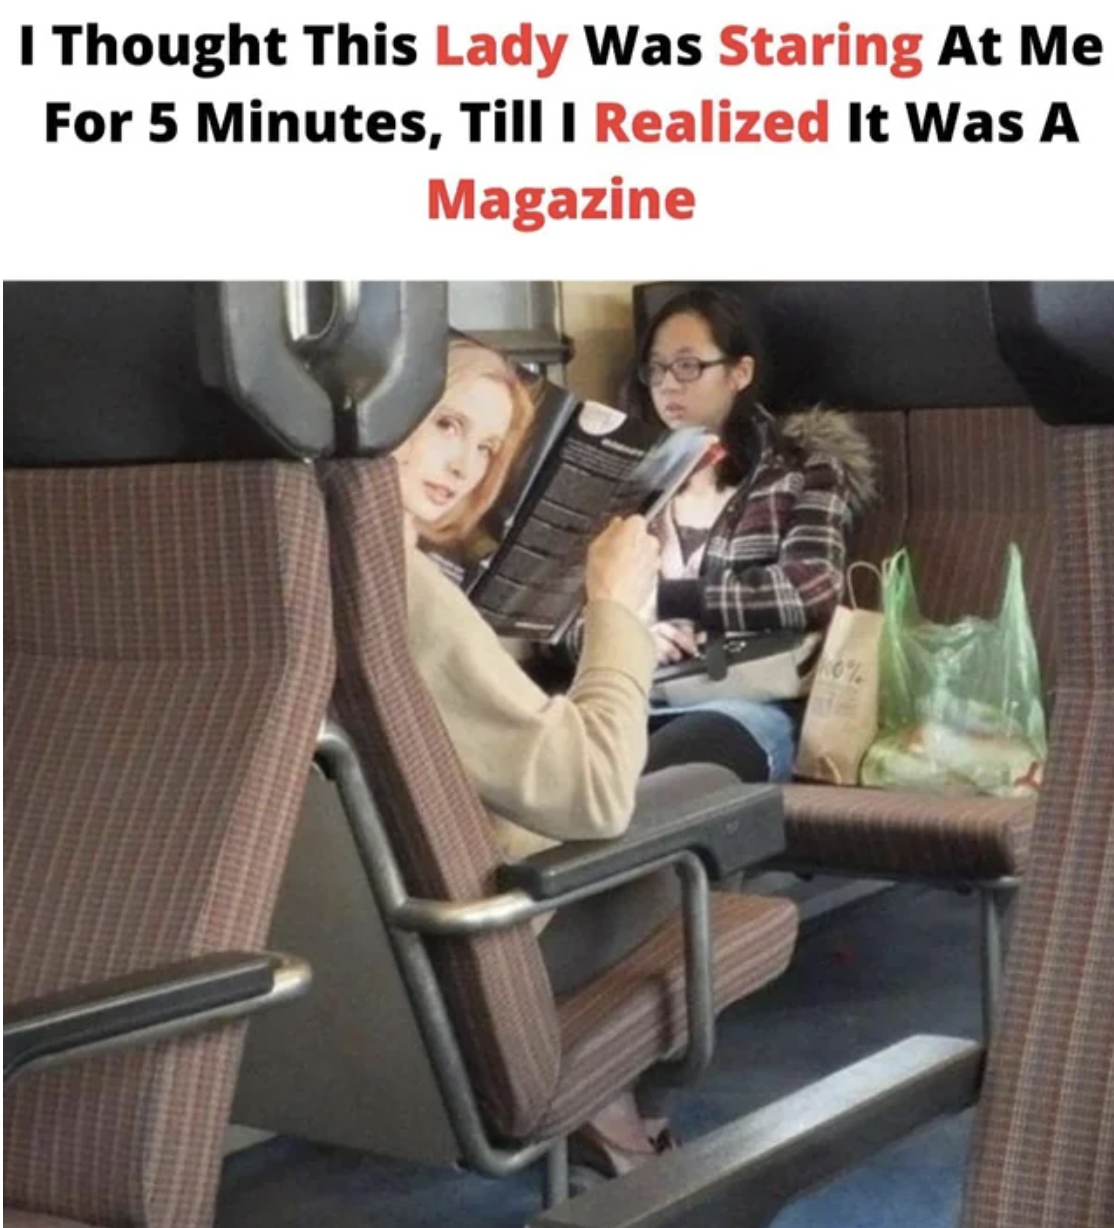 funny fails - Internet meme - I Thought This Lady Was Staring At Me For 5 Minutes, Till I Realized It Was A Magazine